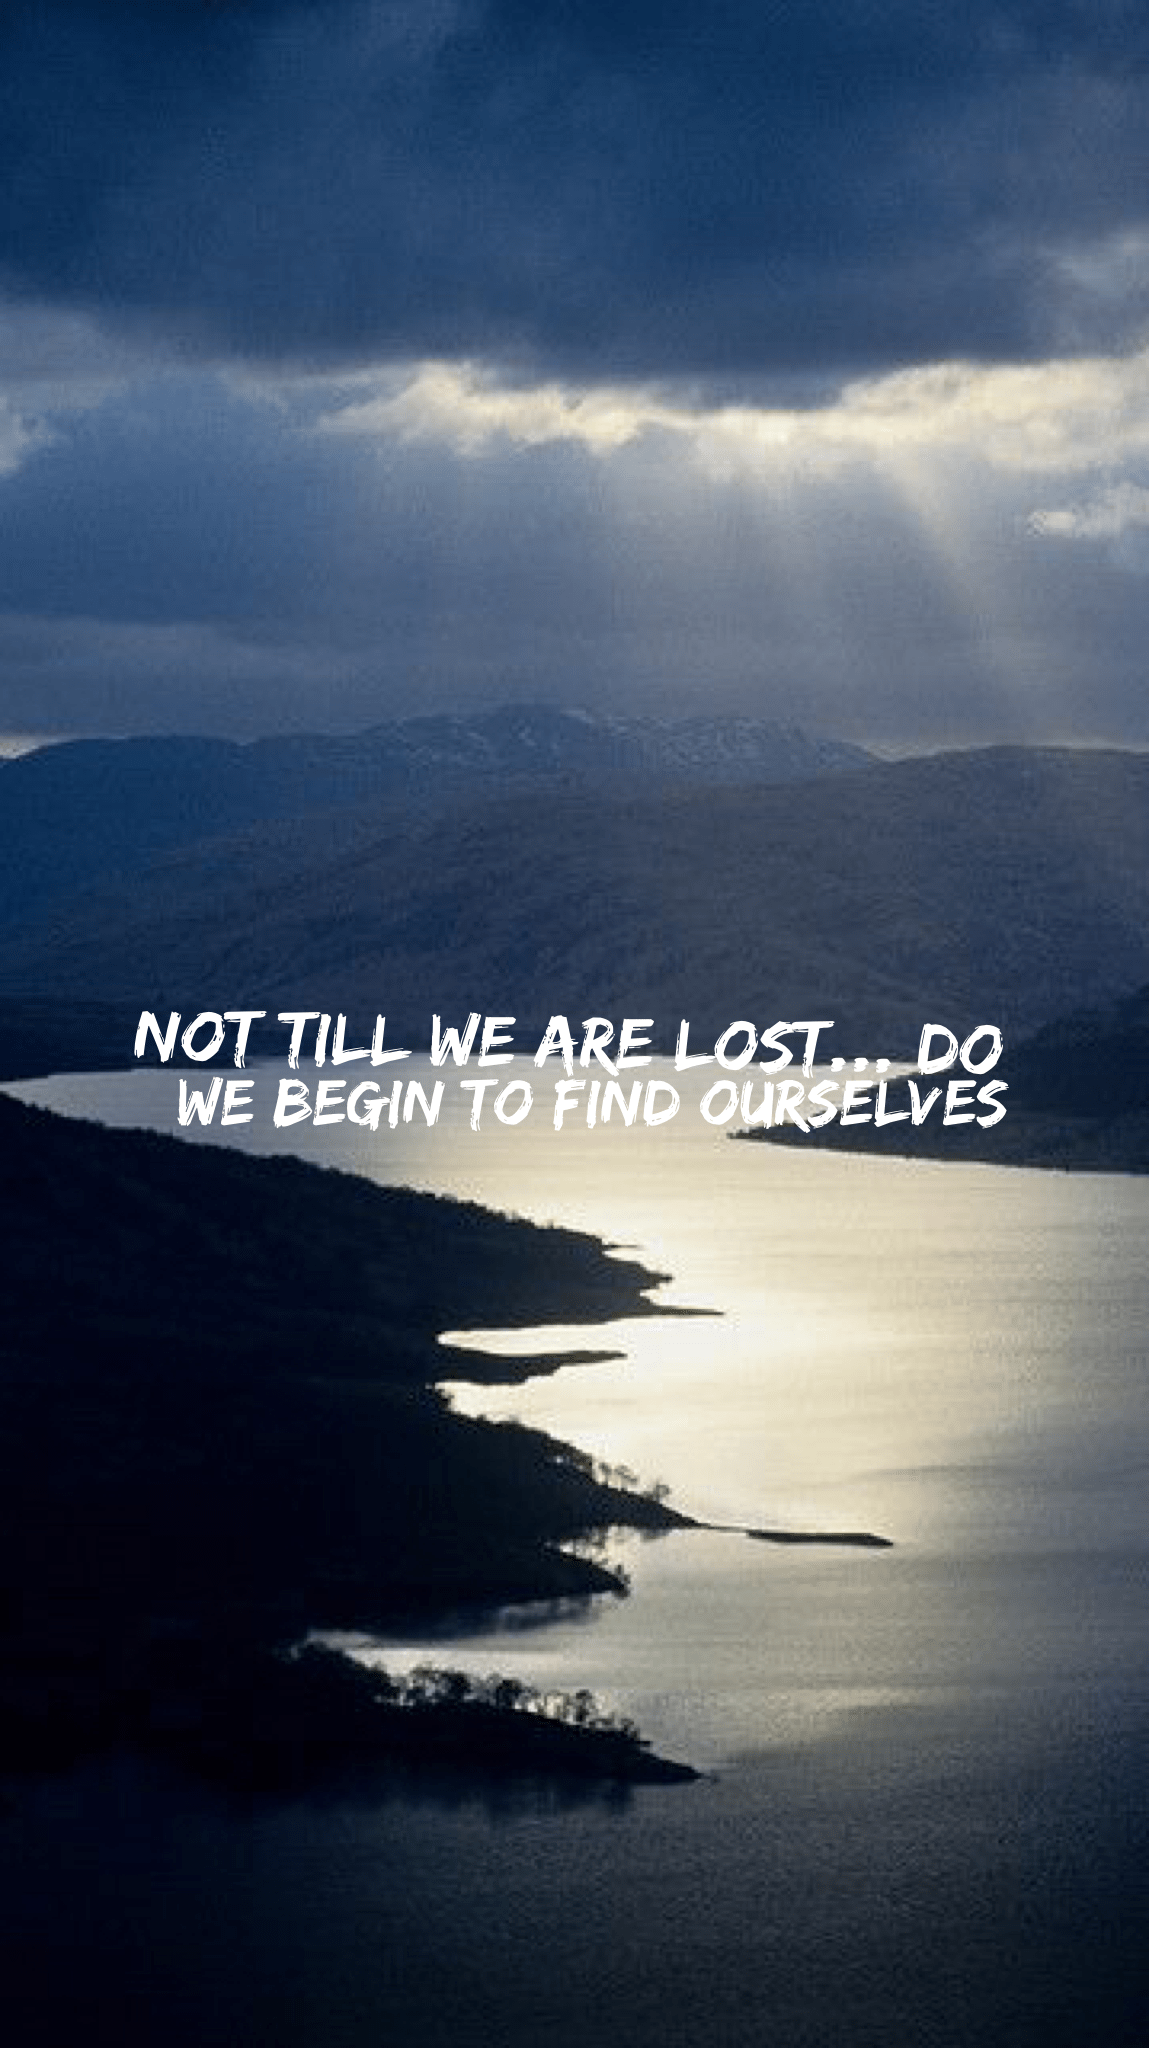 awesome nature wallpapers with quotes